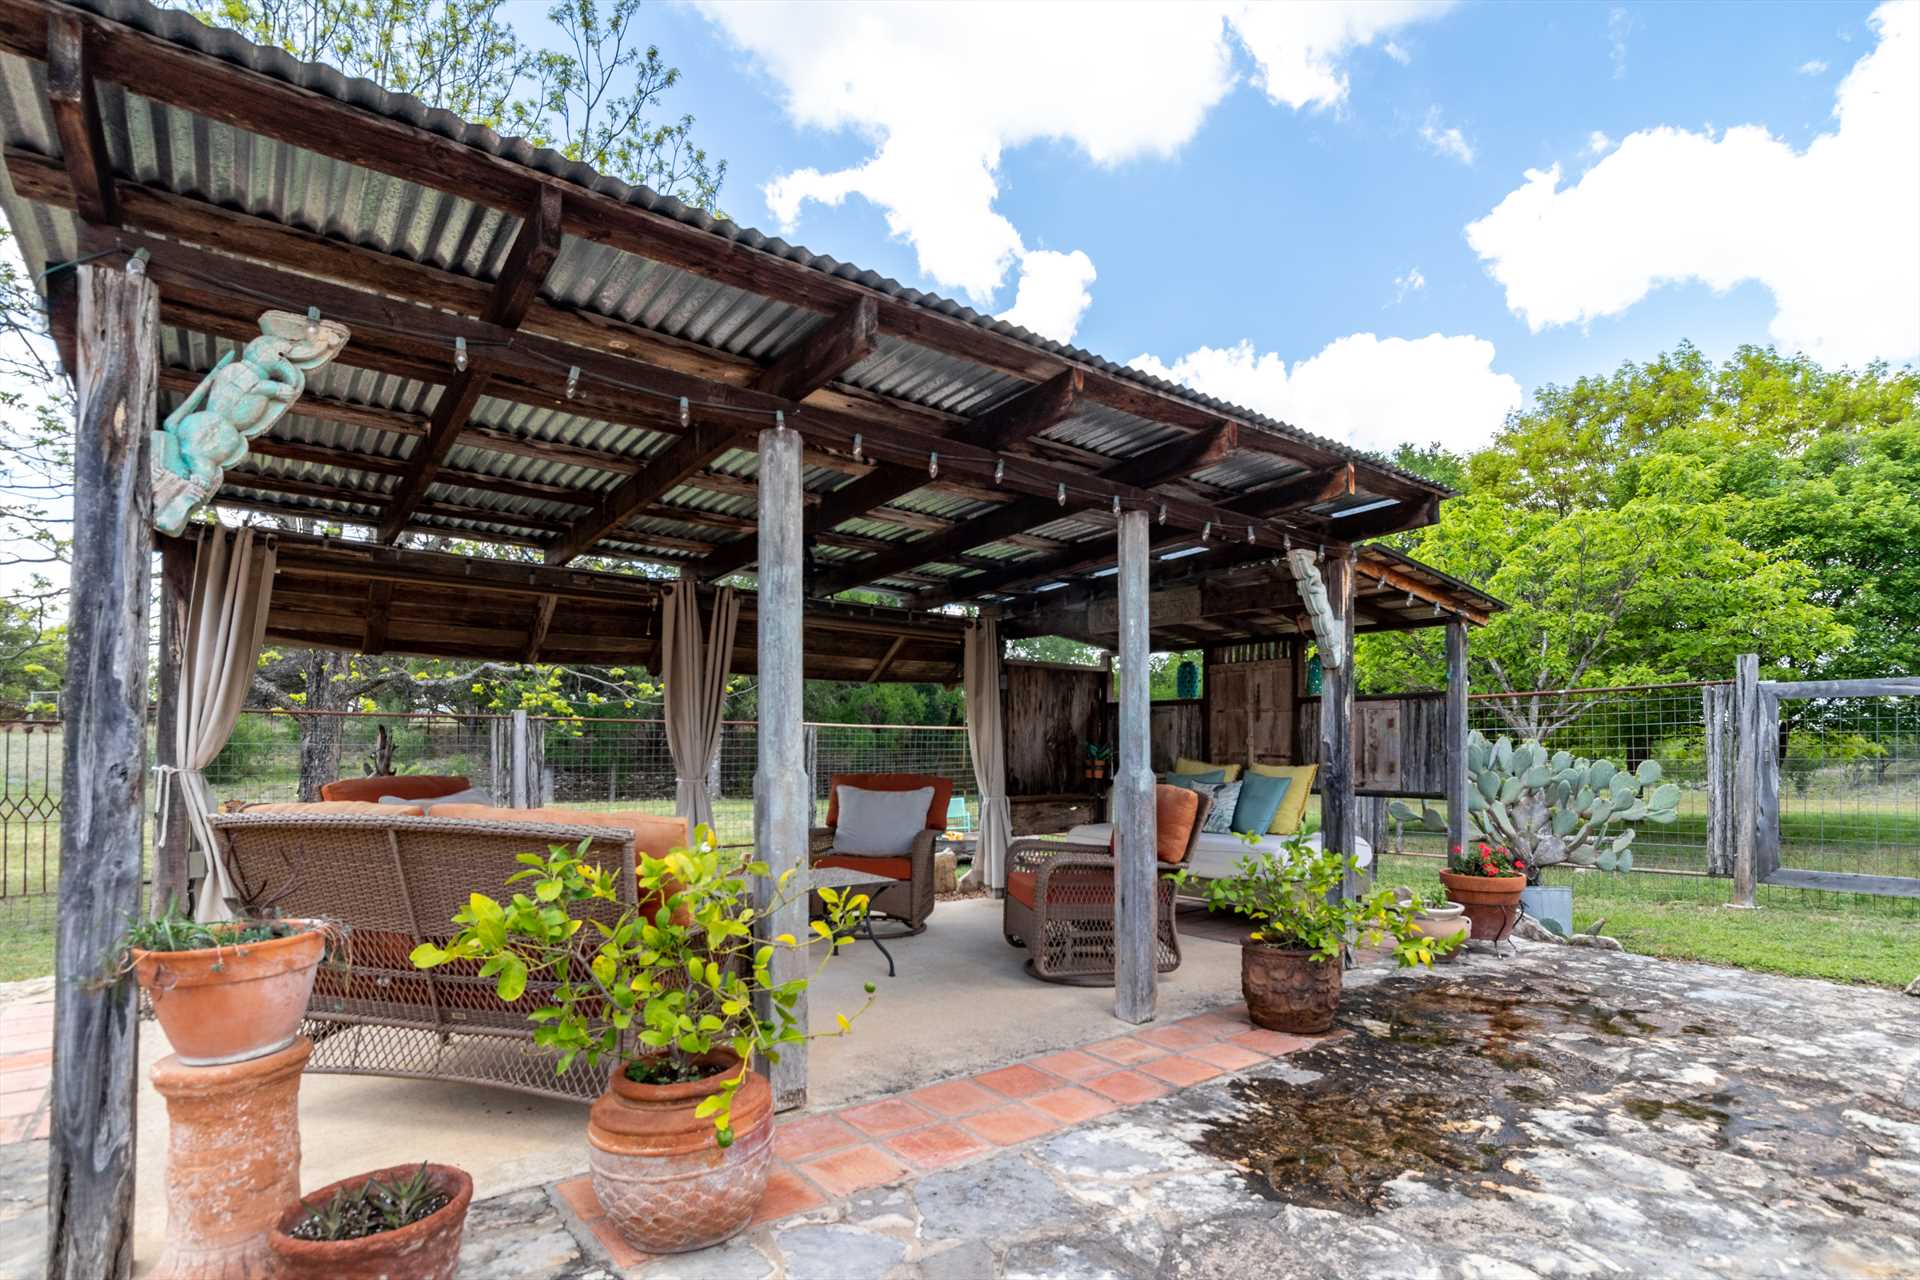                                                 If you use Mucho Gusto as a couples' getaway, each couple can easily have their own private space outside, with three shaded patio areas!